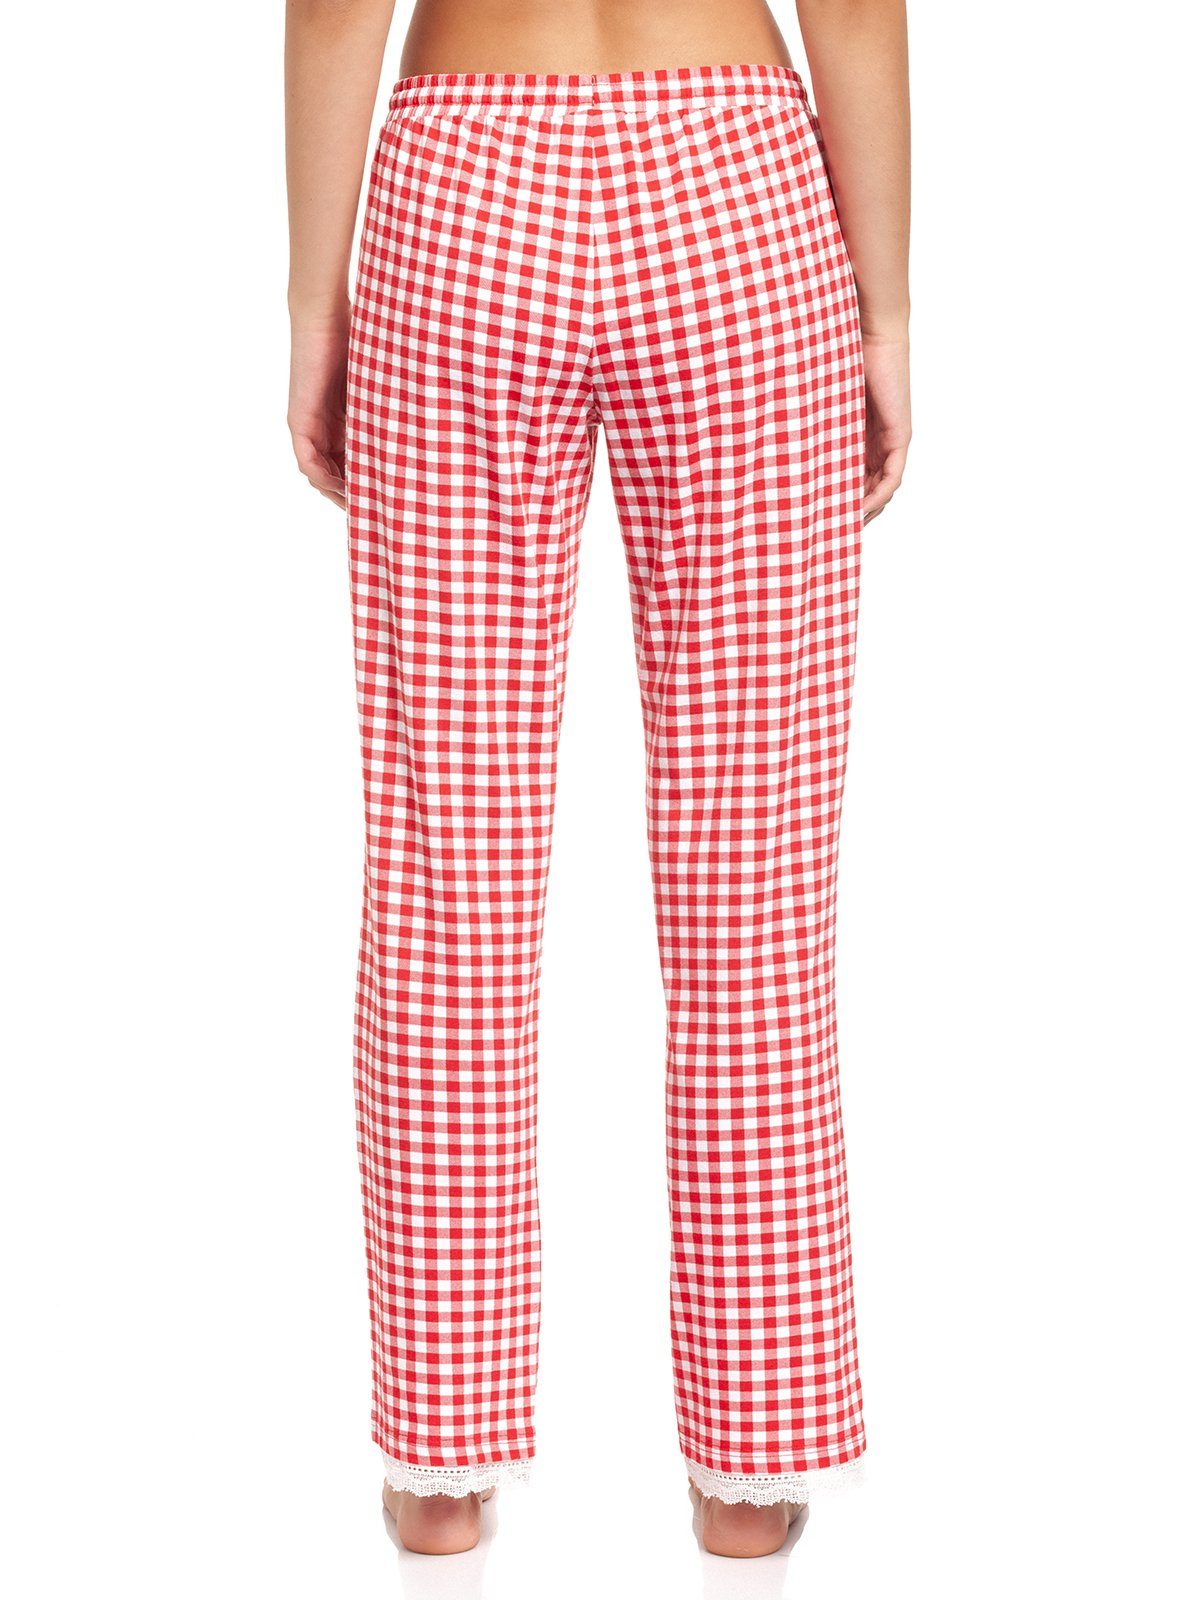 Plaid Deluxe Red Pussy Schlafshorts